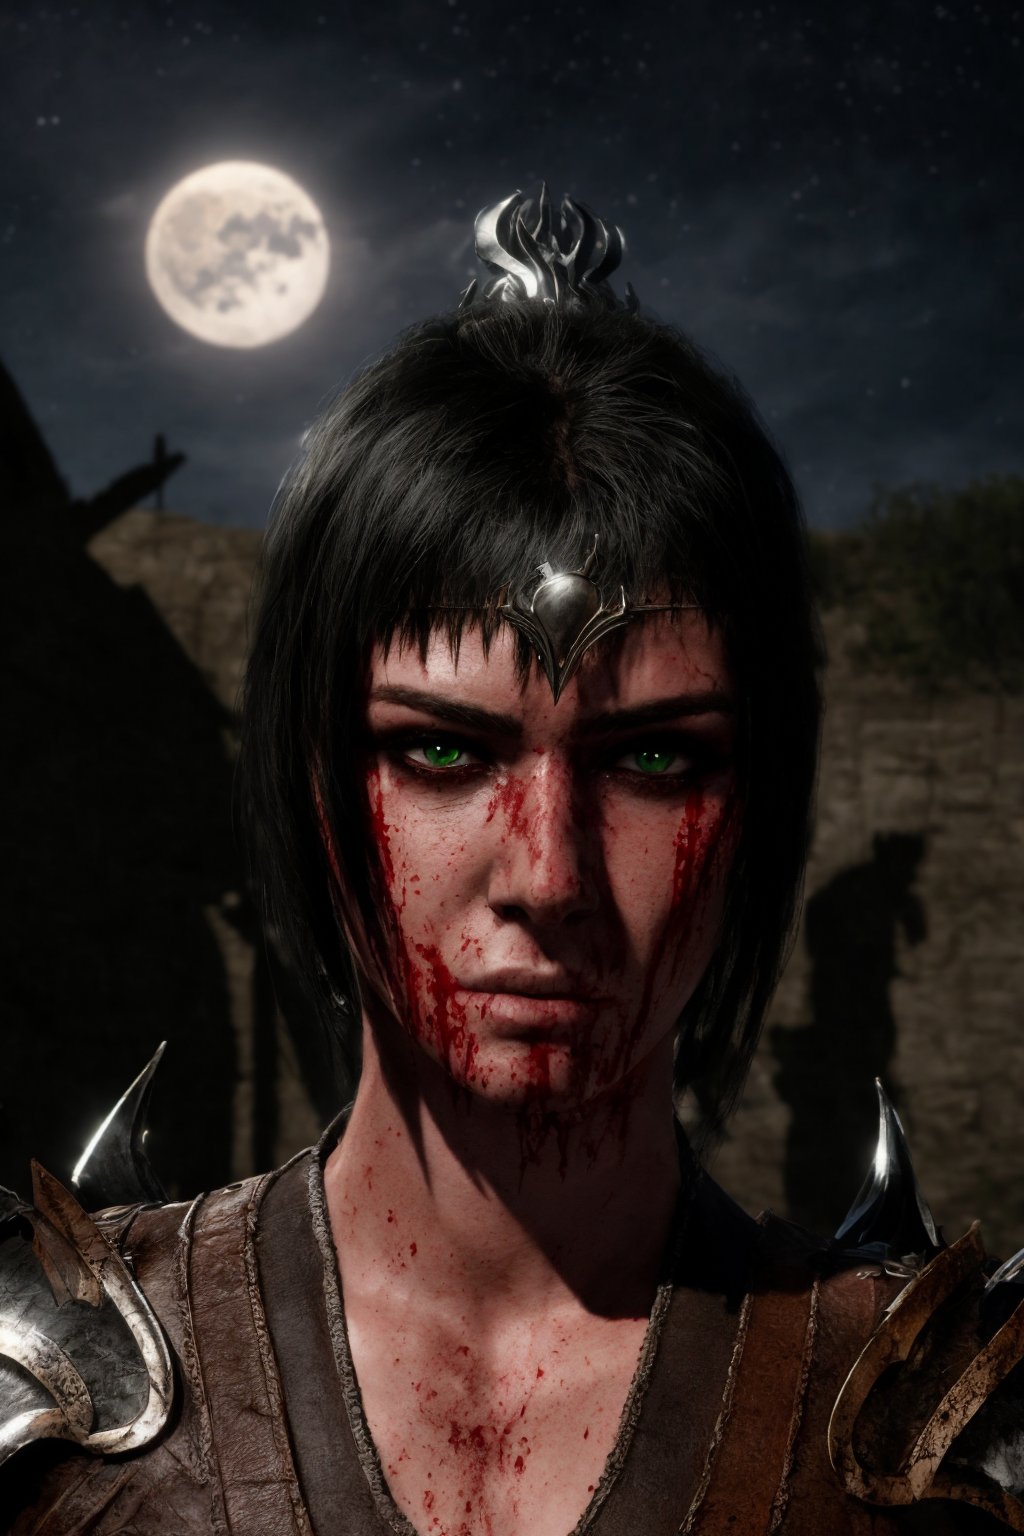 ((shad0wheart)), sh-arm0r, photograph of 1girl, long black hair, bloody face, pale green eyes, scar, armor, fantasy setting, facing toward viewer, portrait, standing in village, night, shadow, UHD, best quality, masterpiece, photorealistic, detailed skin, realistic skin